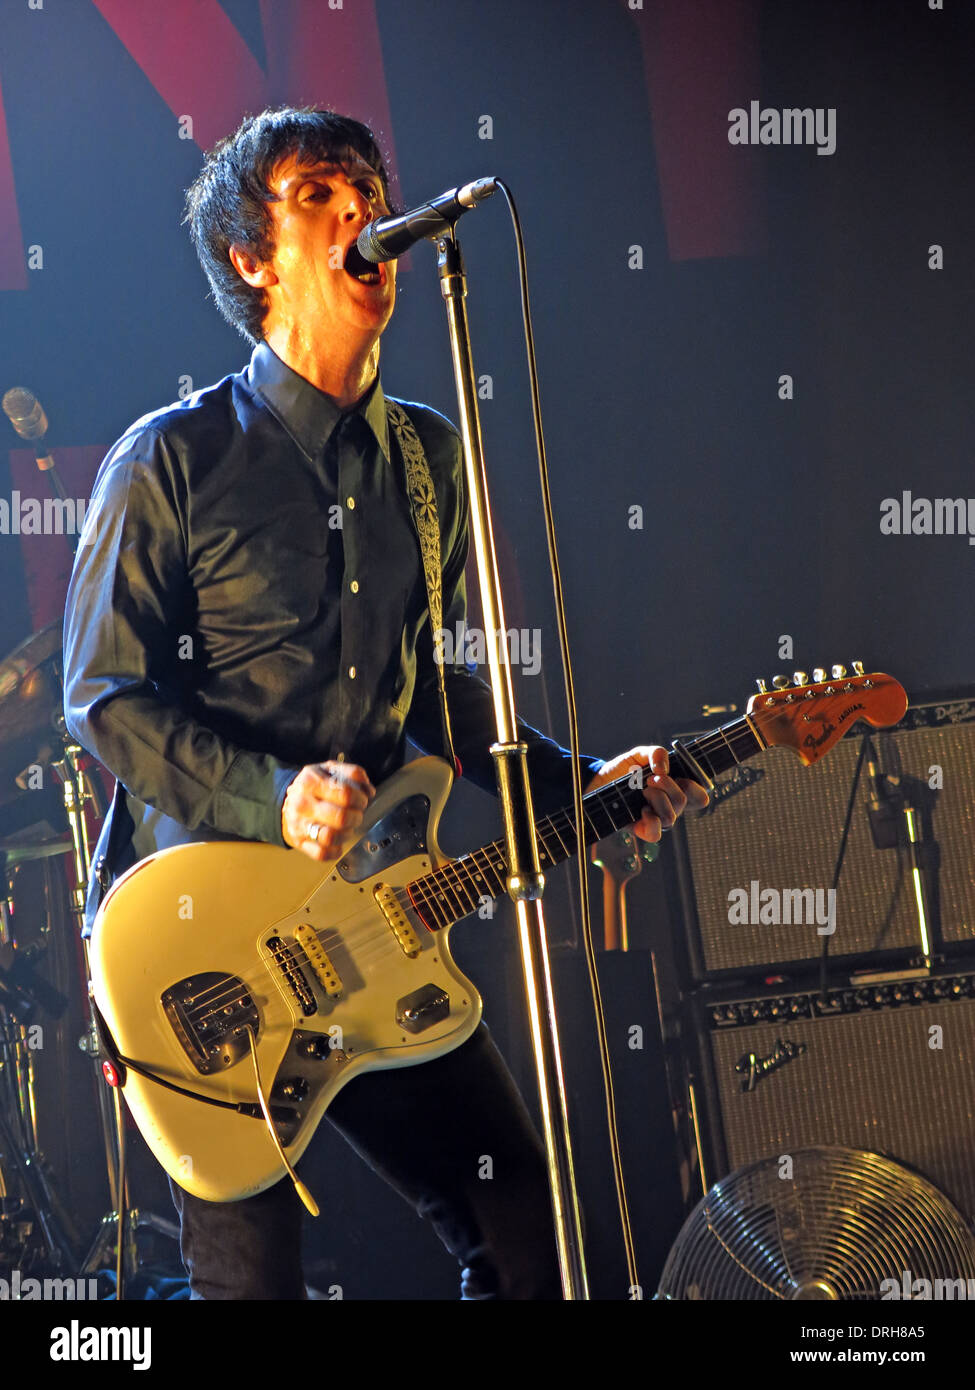 Johnny Marr of Smiths Manchester Academy live on stage playing fender guitar England UK 2013 12-10-2013 Stock Photo